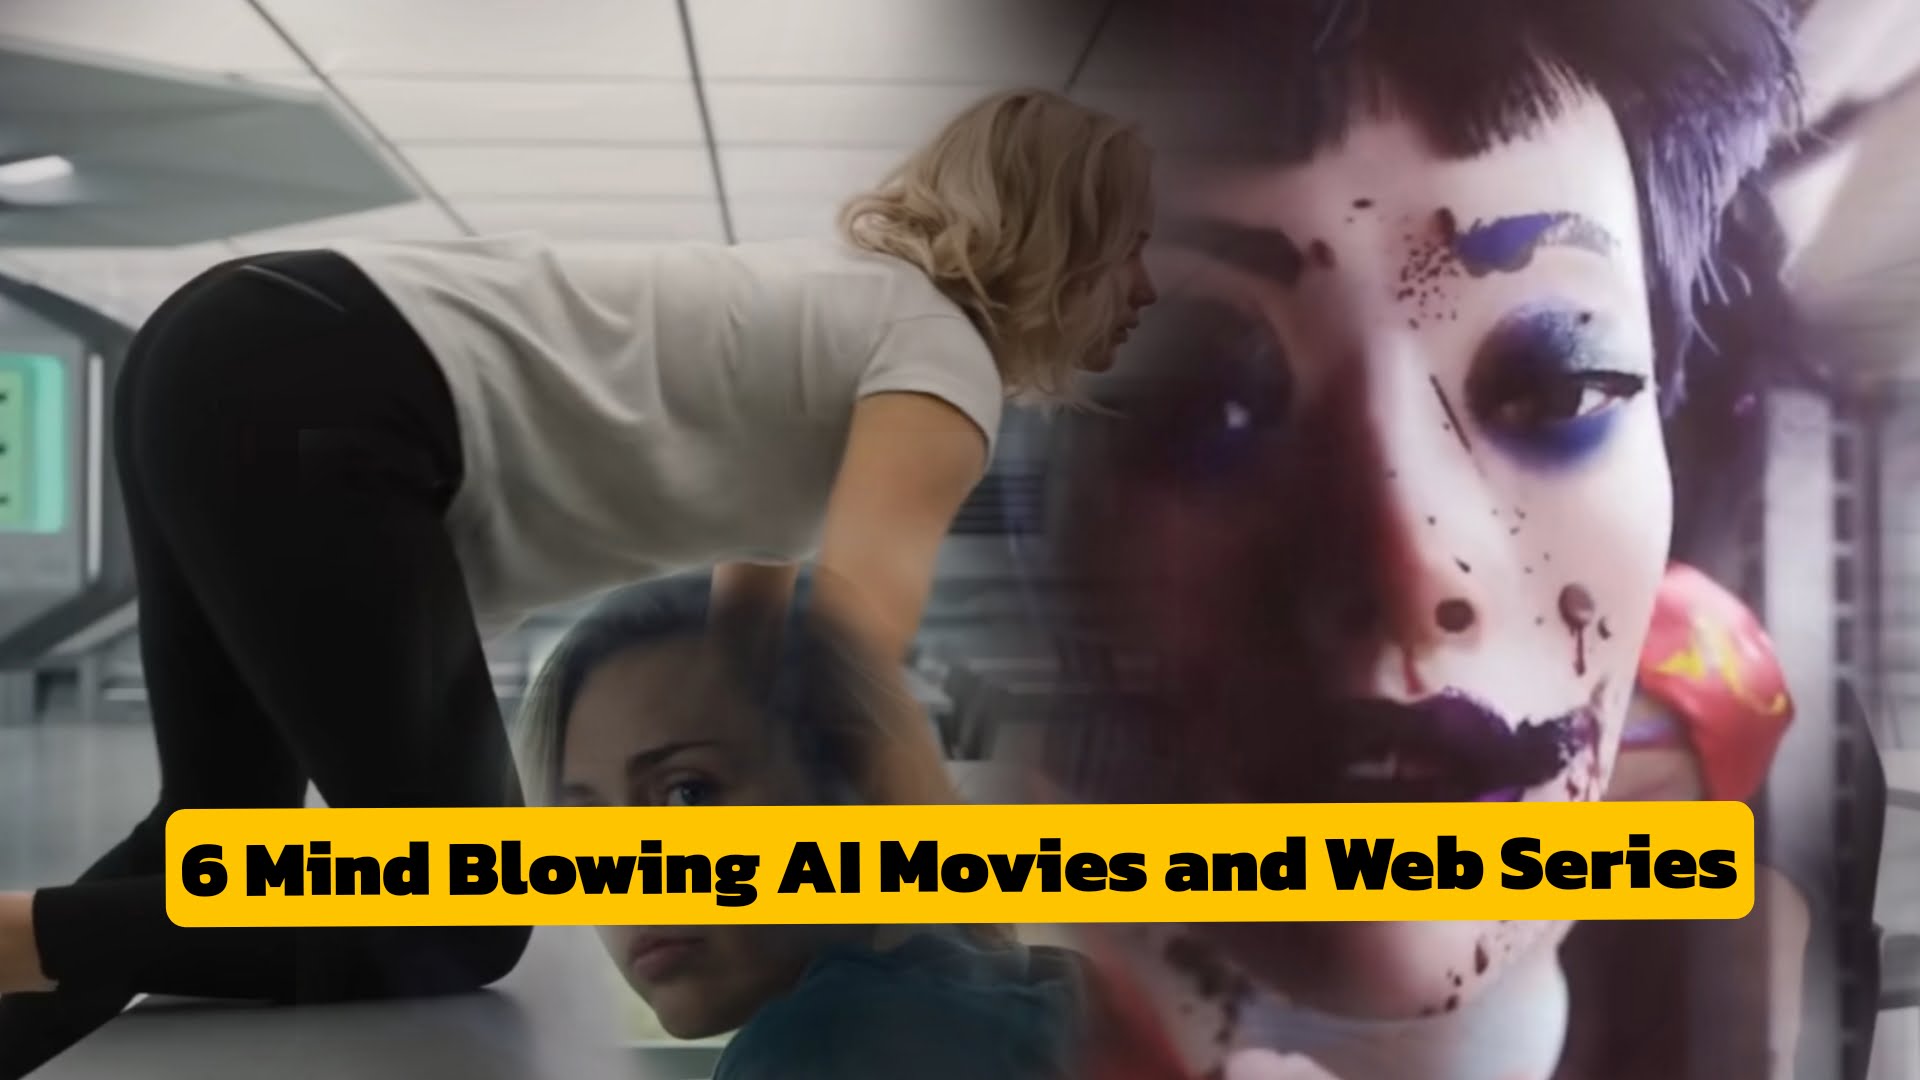 6 Mind Blowing AI Movies and Web Series